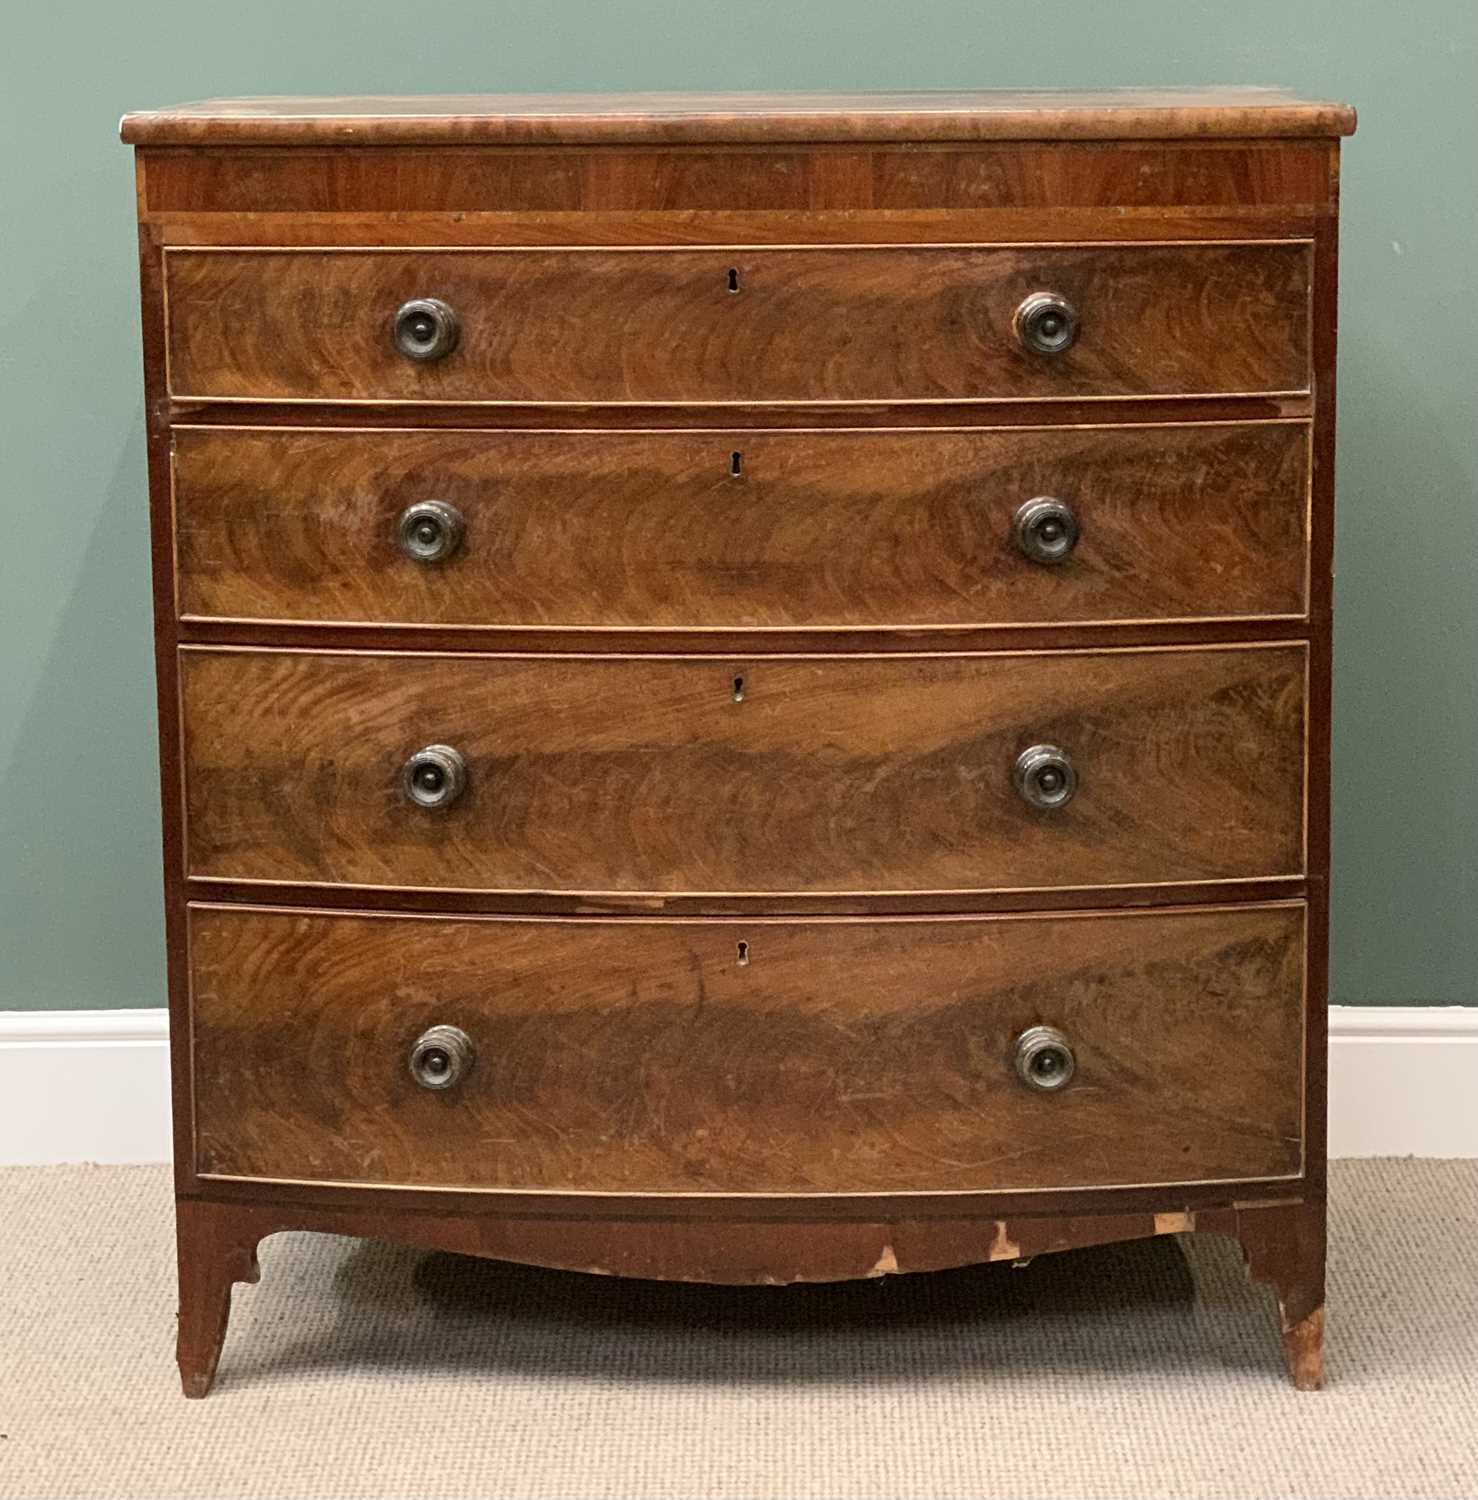 REGENCY CHEST OF 4 DRAWERS - bow fronted mahogany with turned knobs, 117cms H, 106cms W, 53cms D